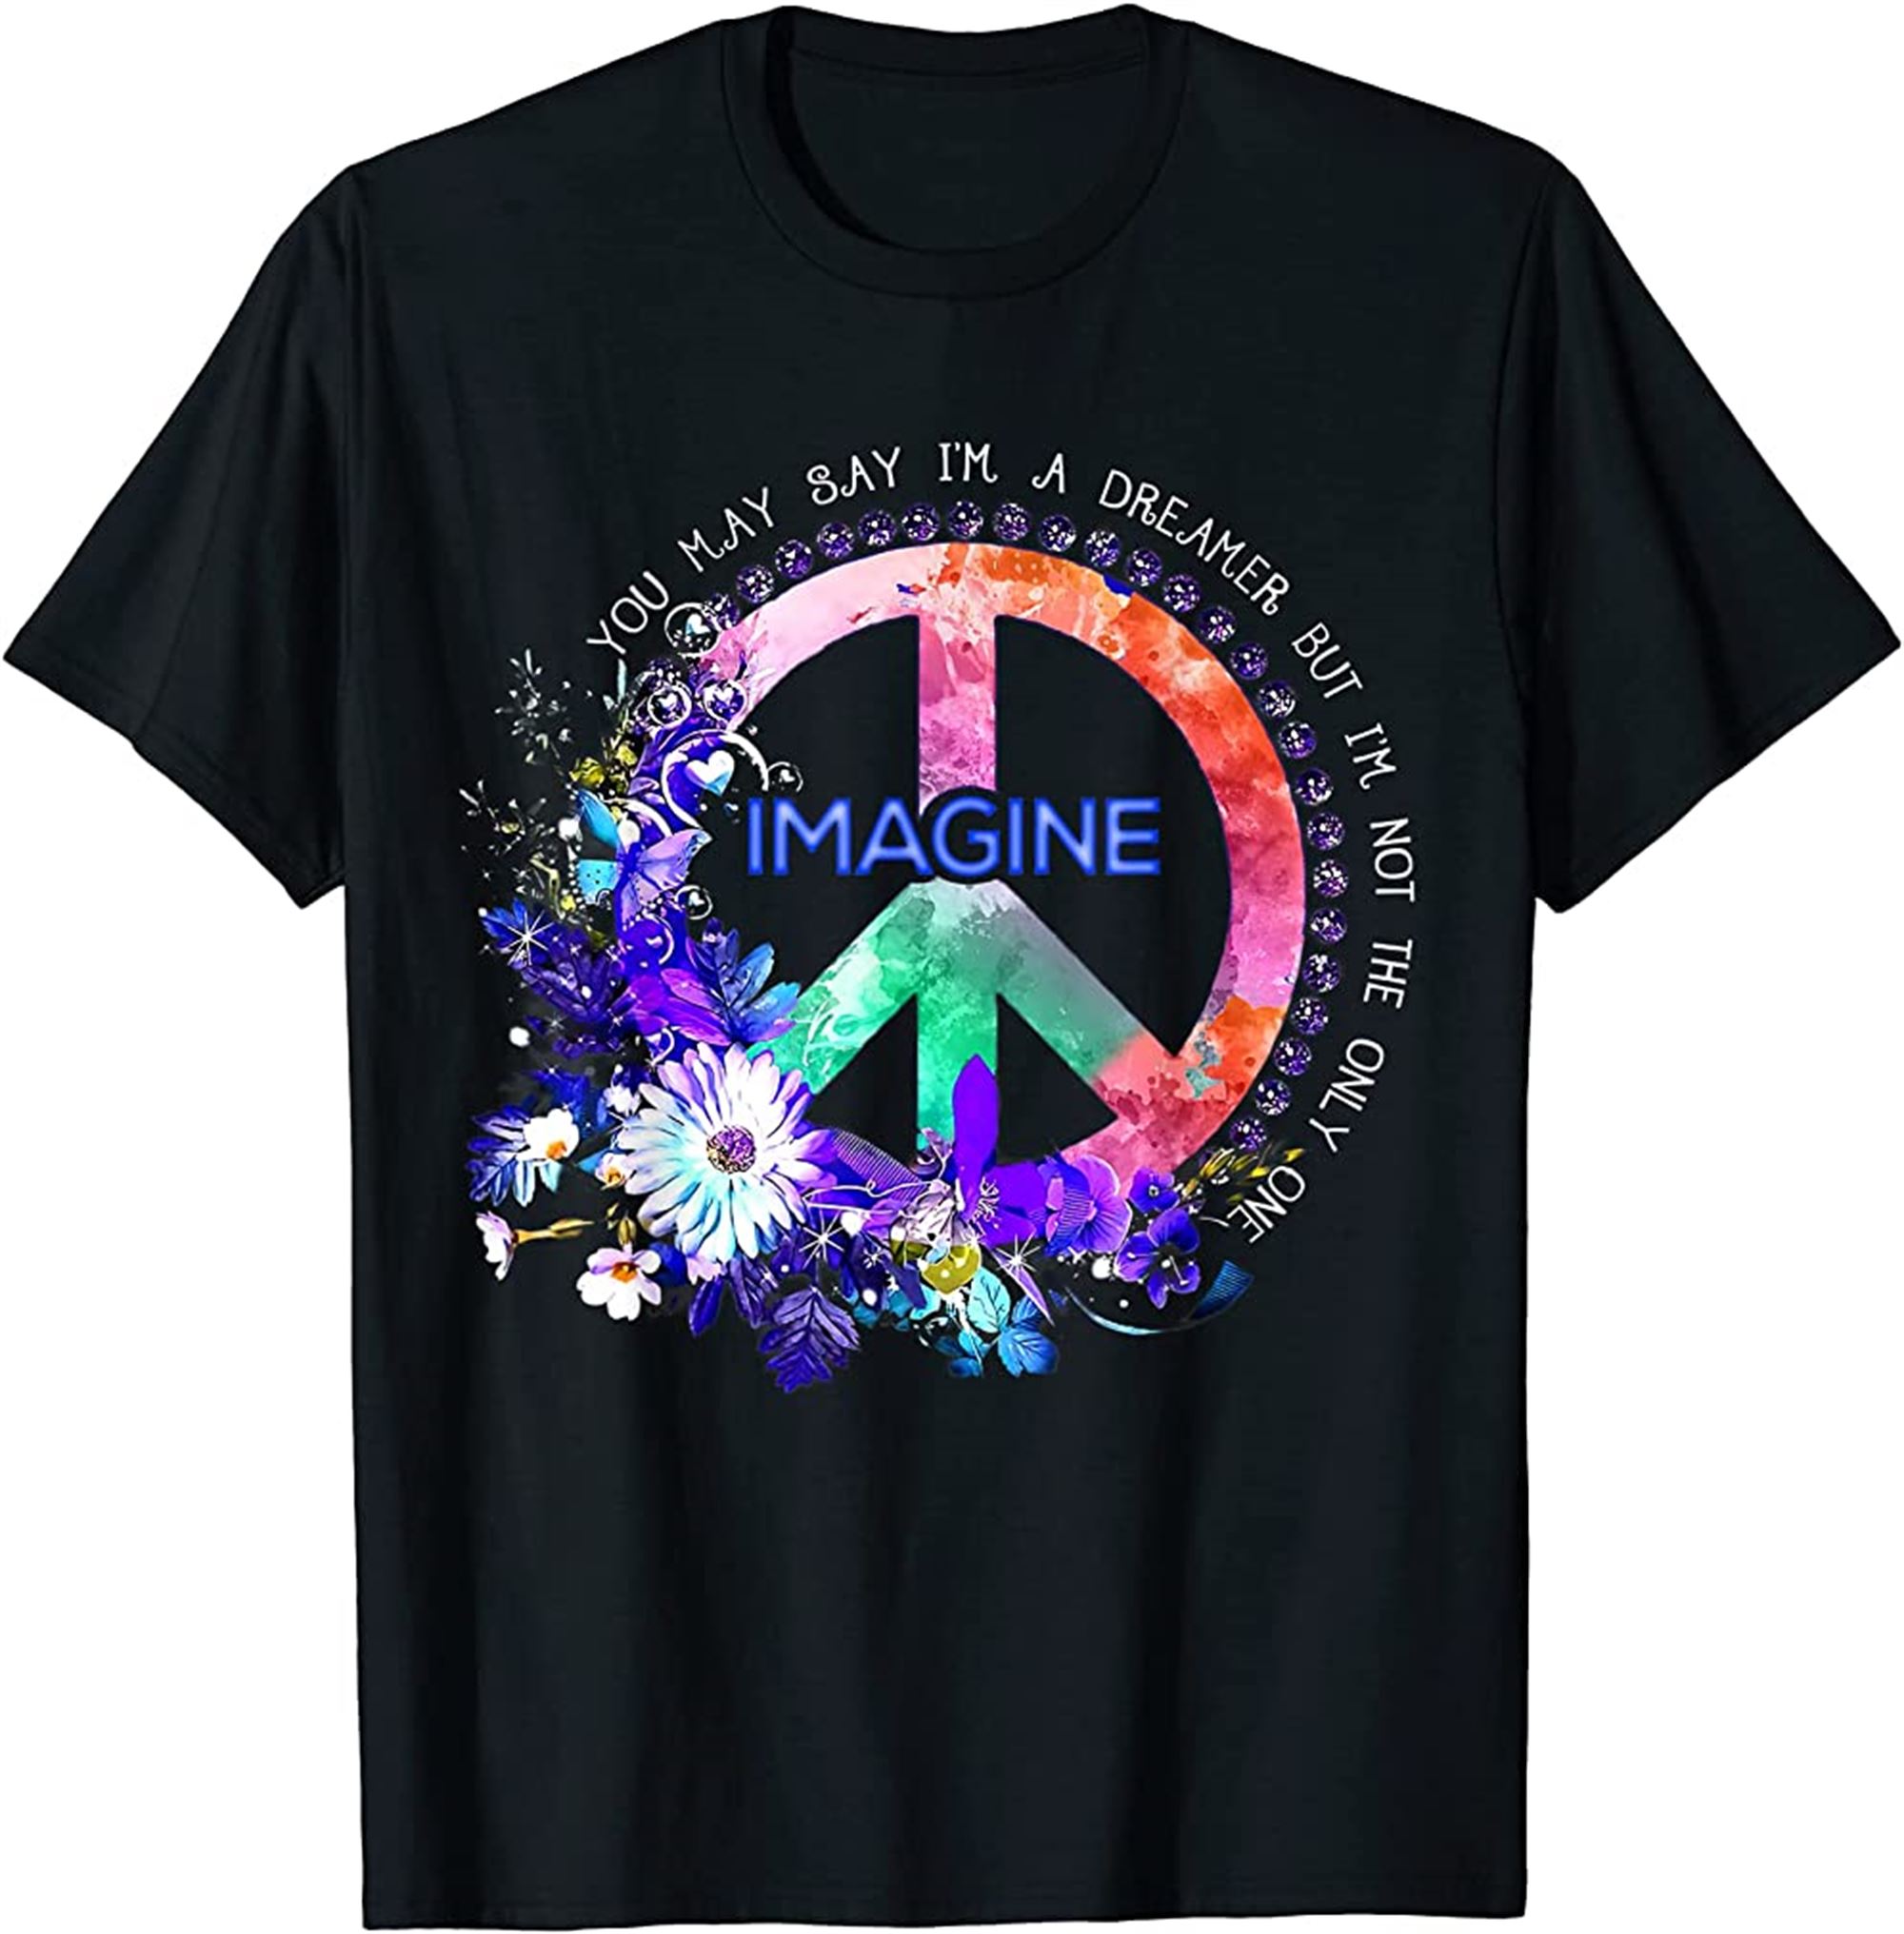 You May Say Im A Dreamer But Im Not The Only One Peace T-shirt Plus Size Up To 5xl